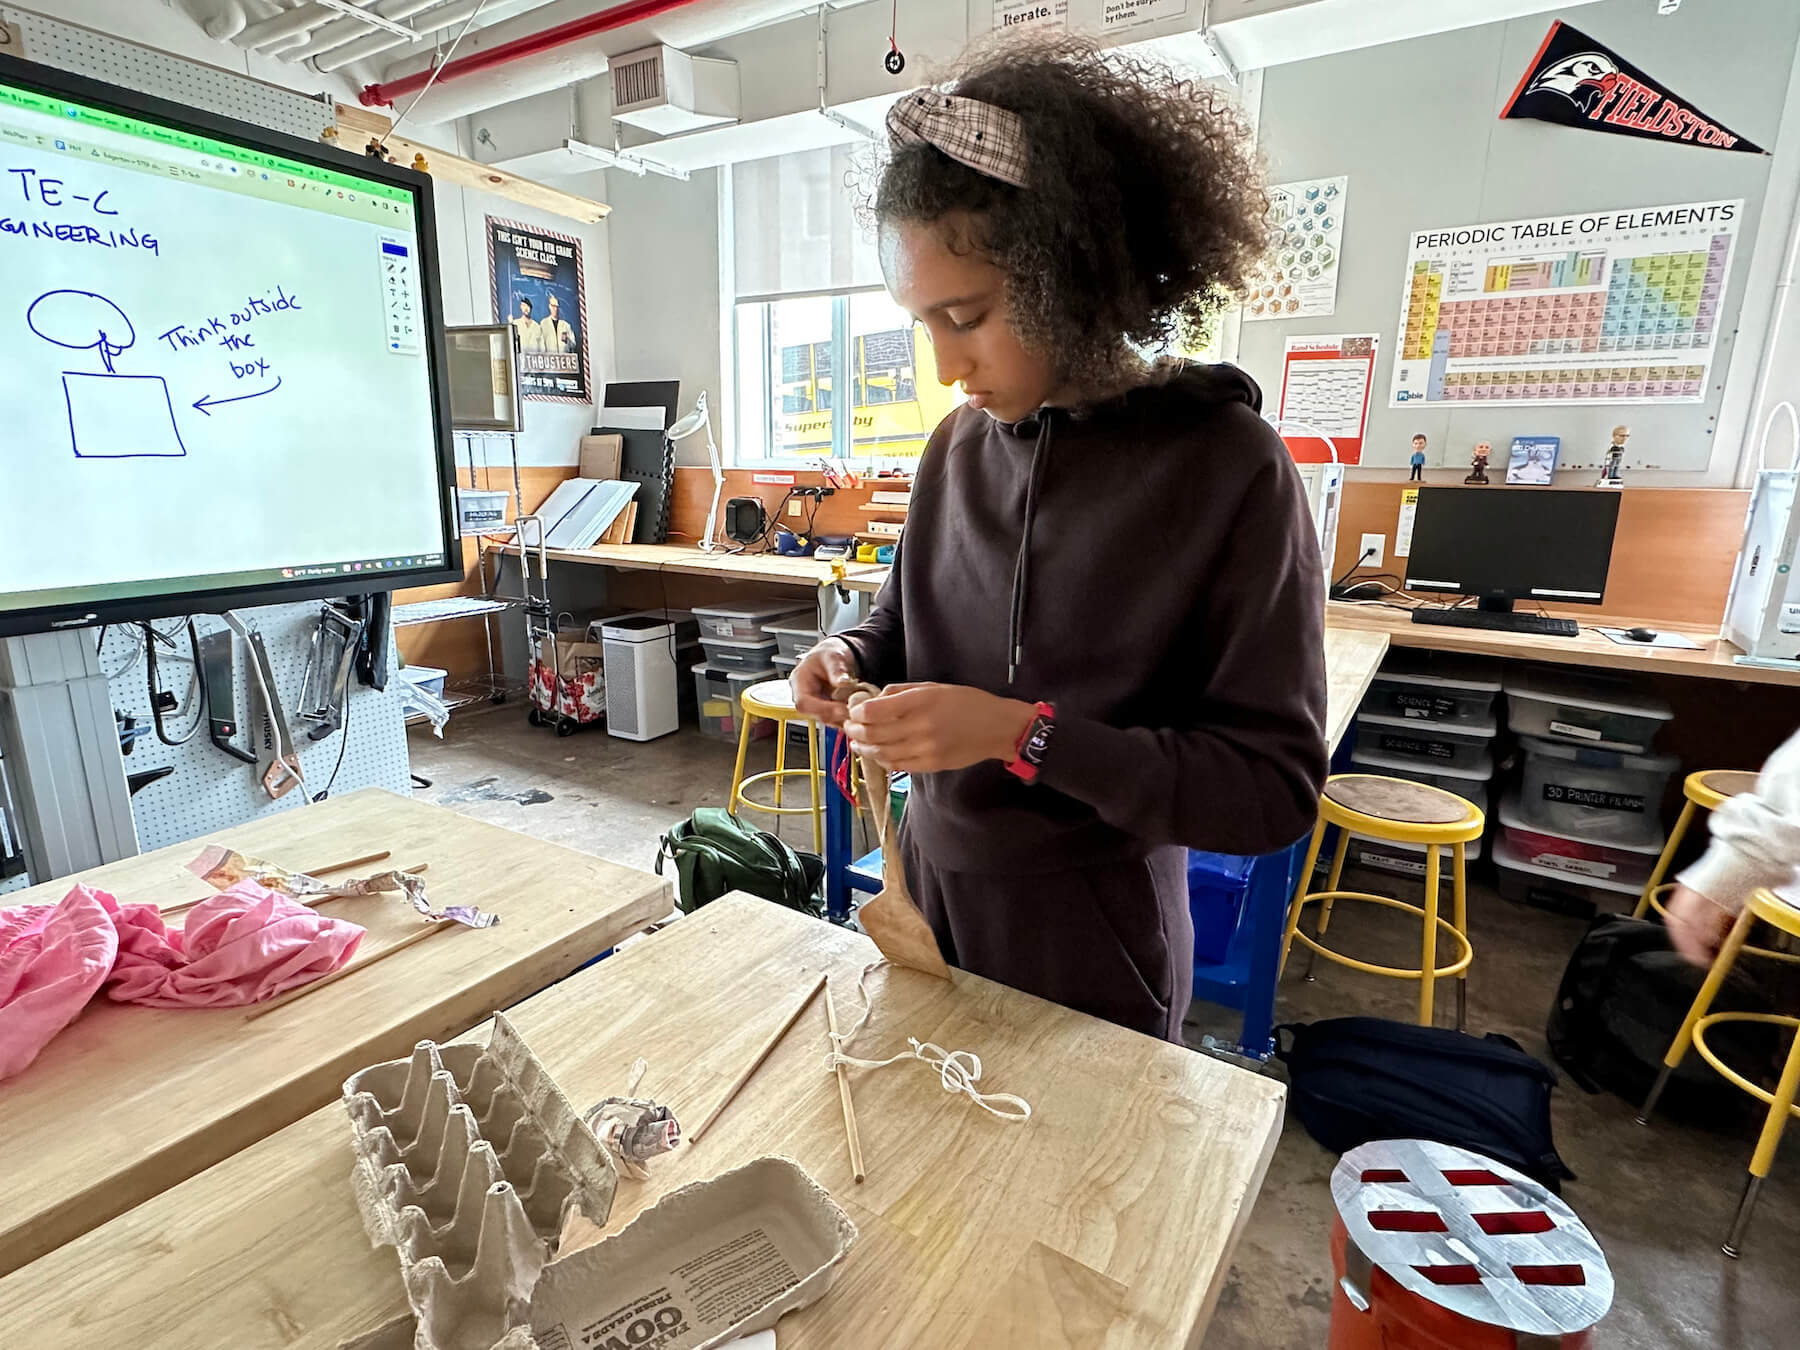 An Ethical Culture Fieldston School student takes an engineering class.